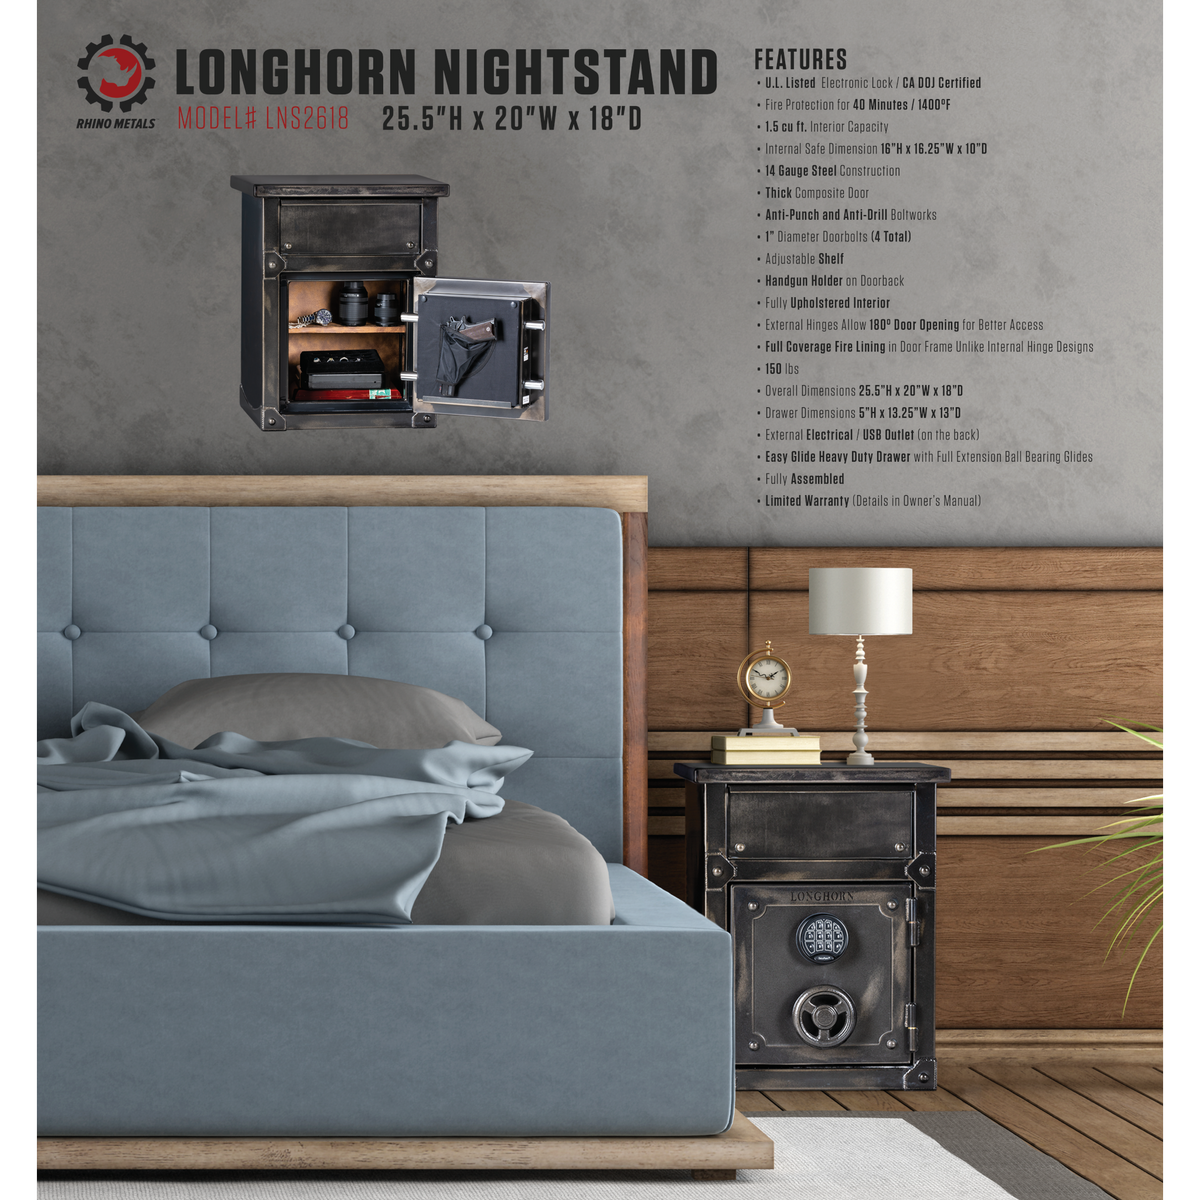 Longhorn LNS2618 Door Closed with Lamp 2 Books and Clock on top. Pictured in a grey wood trimmed bedroom on the right side of the bed.